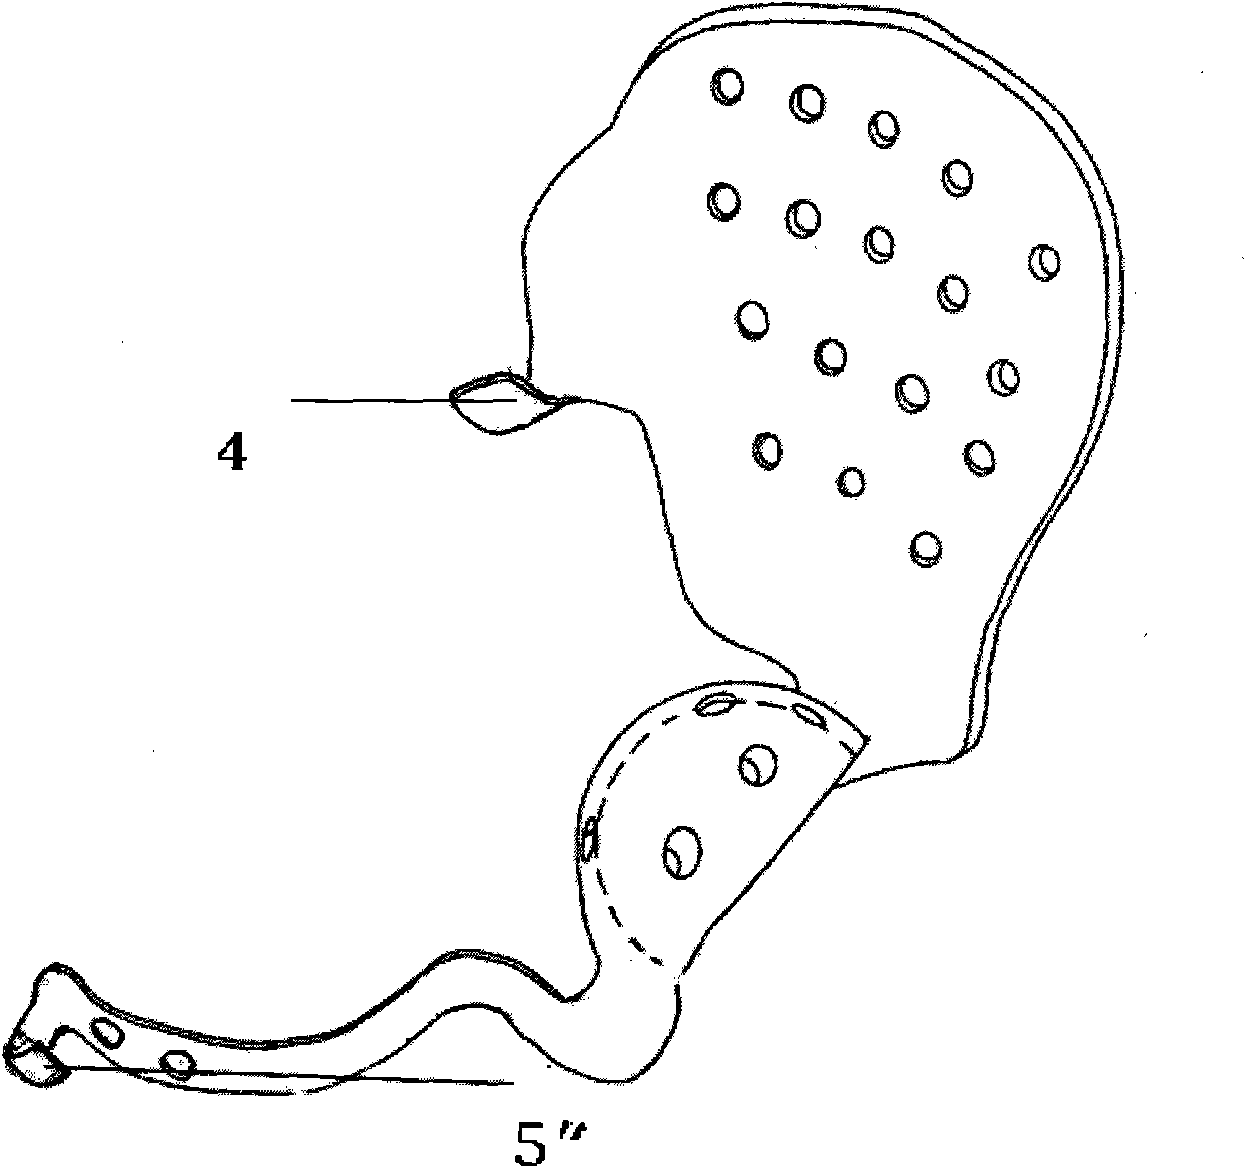 Artificial half pelvic prosthesis with support structure